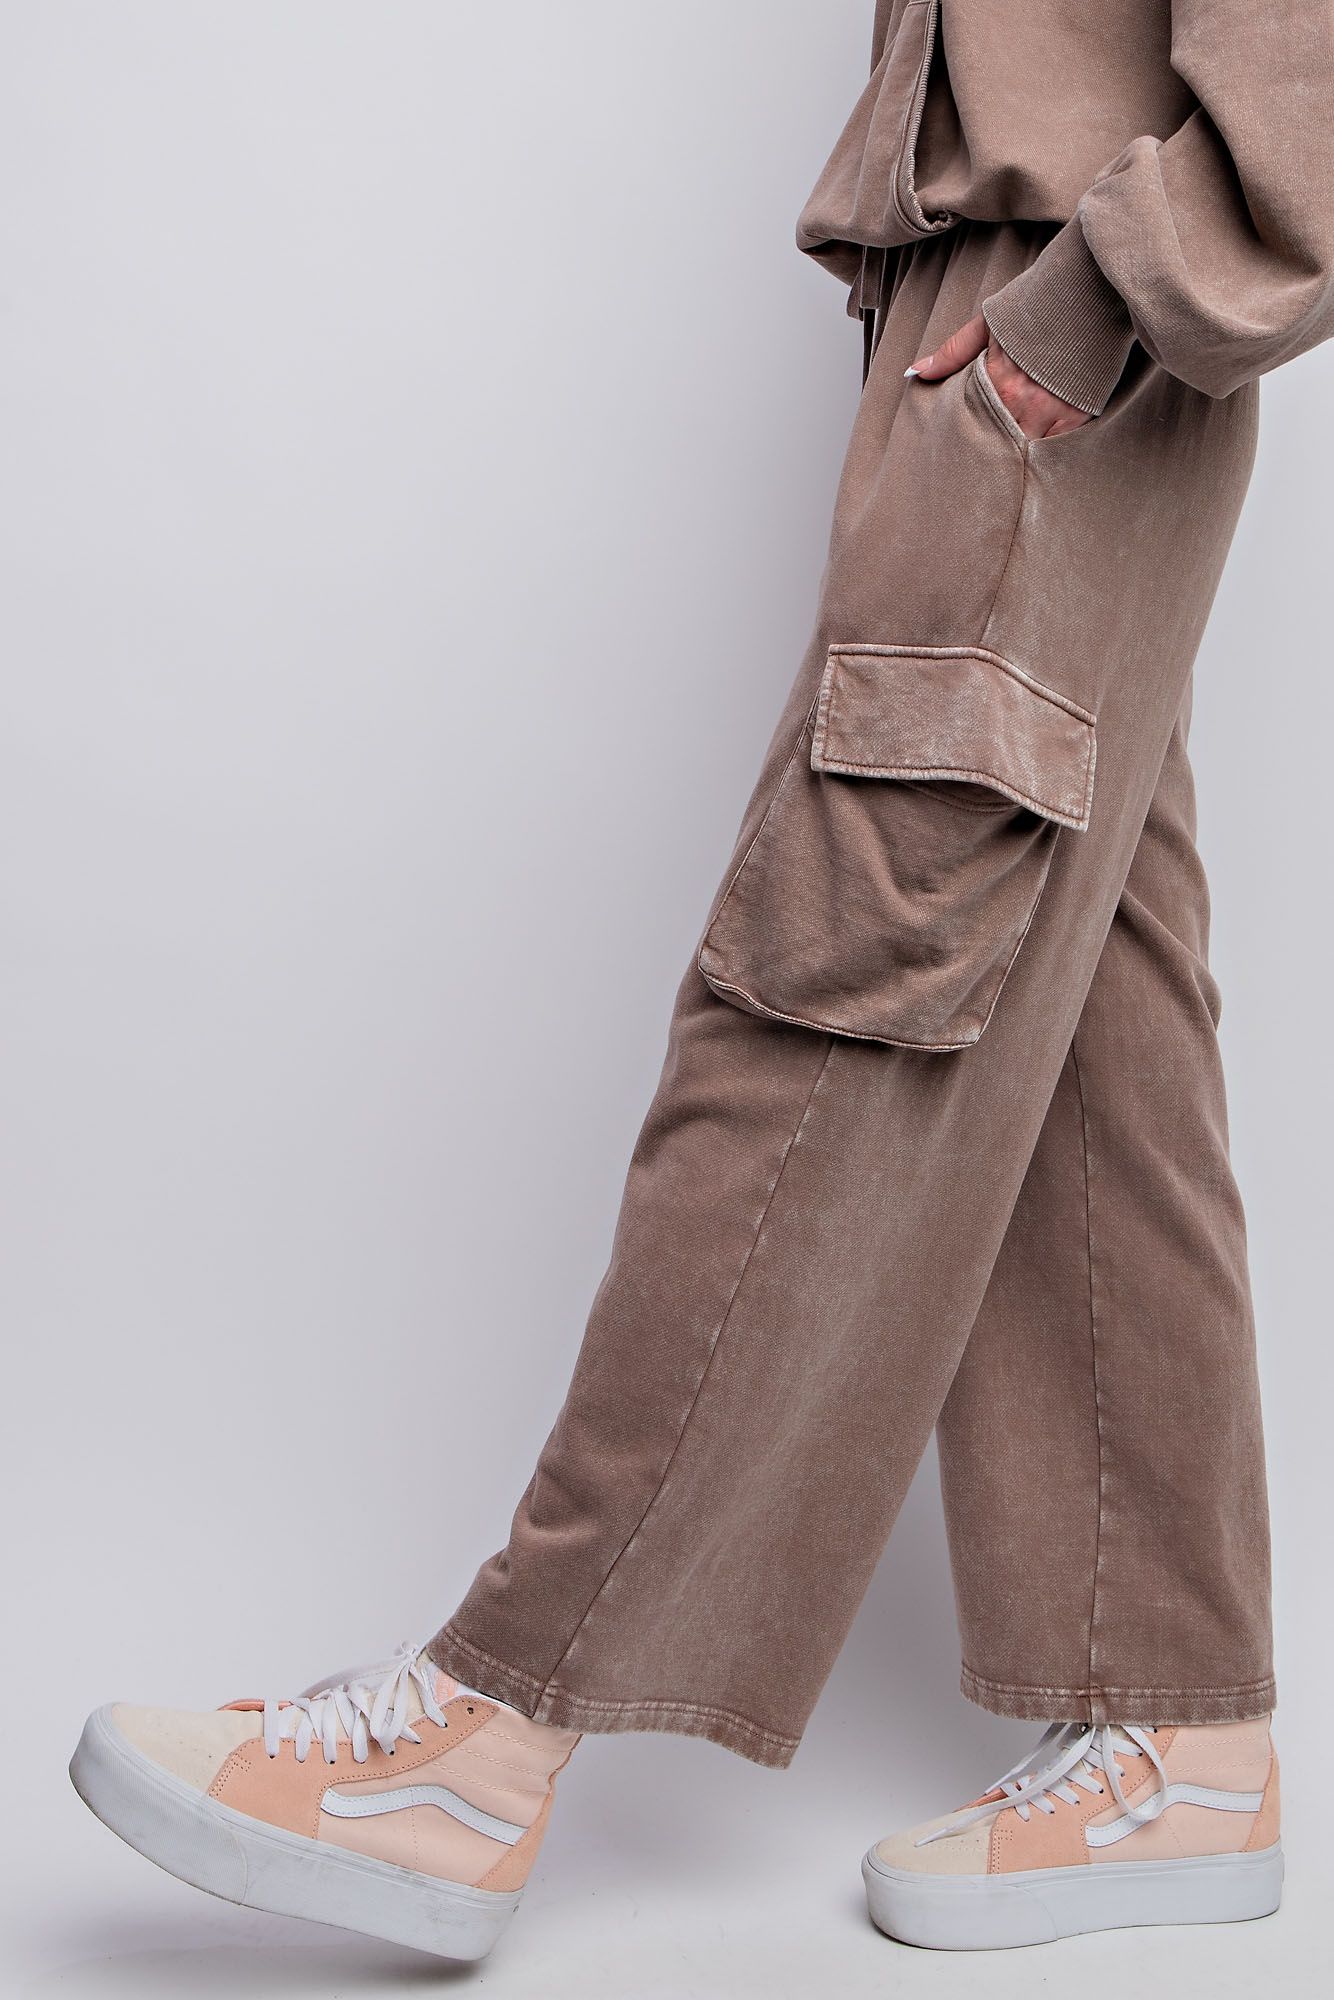 Easel Mineral Washed Terry Knit Pant